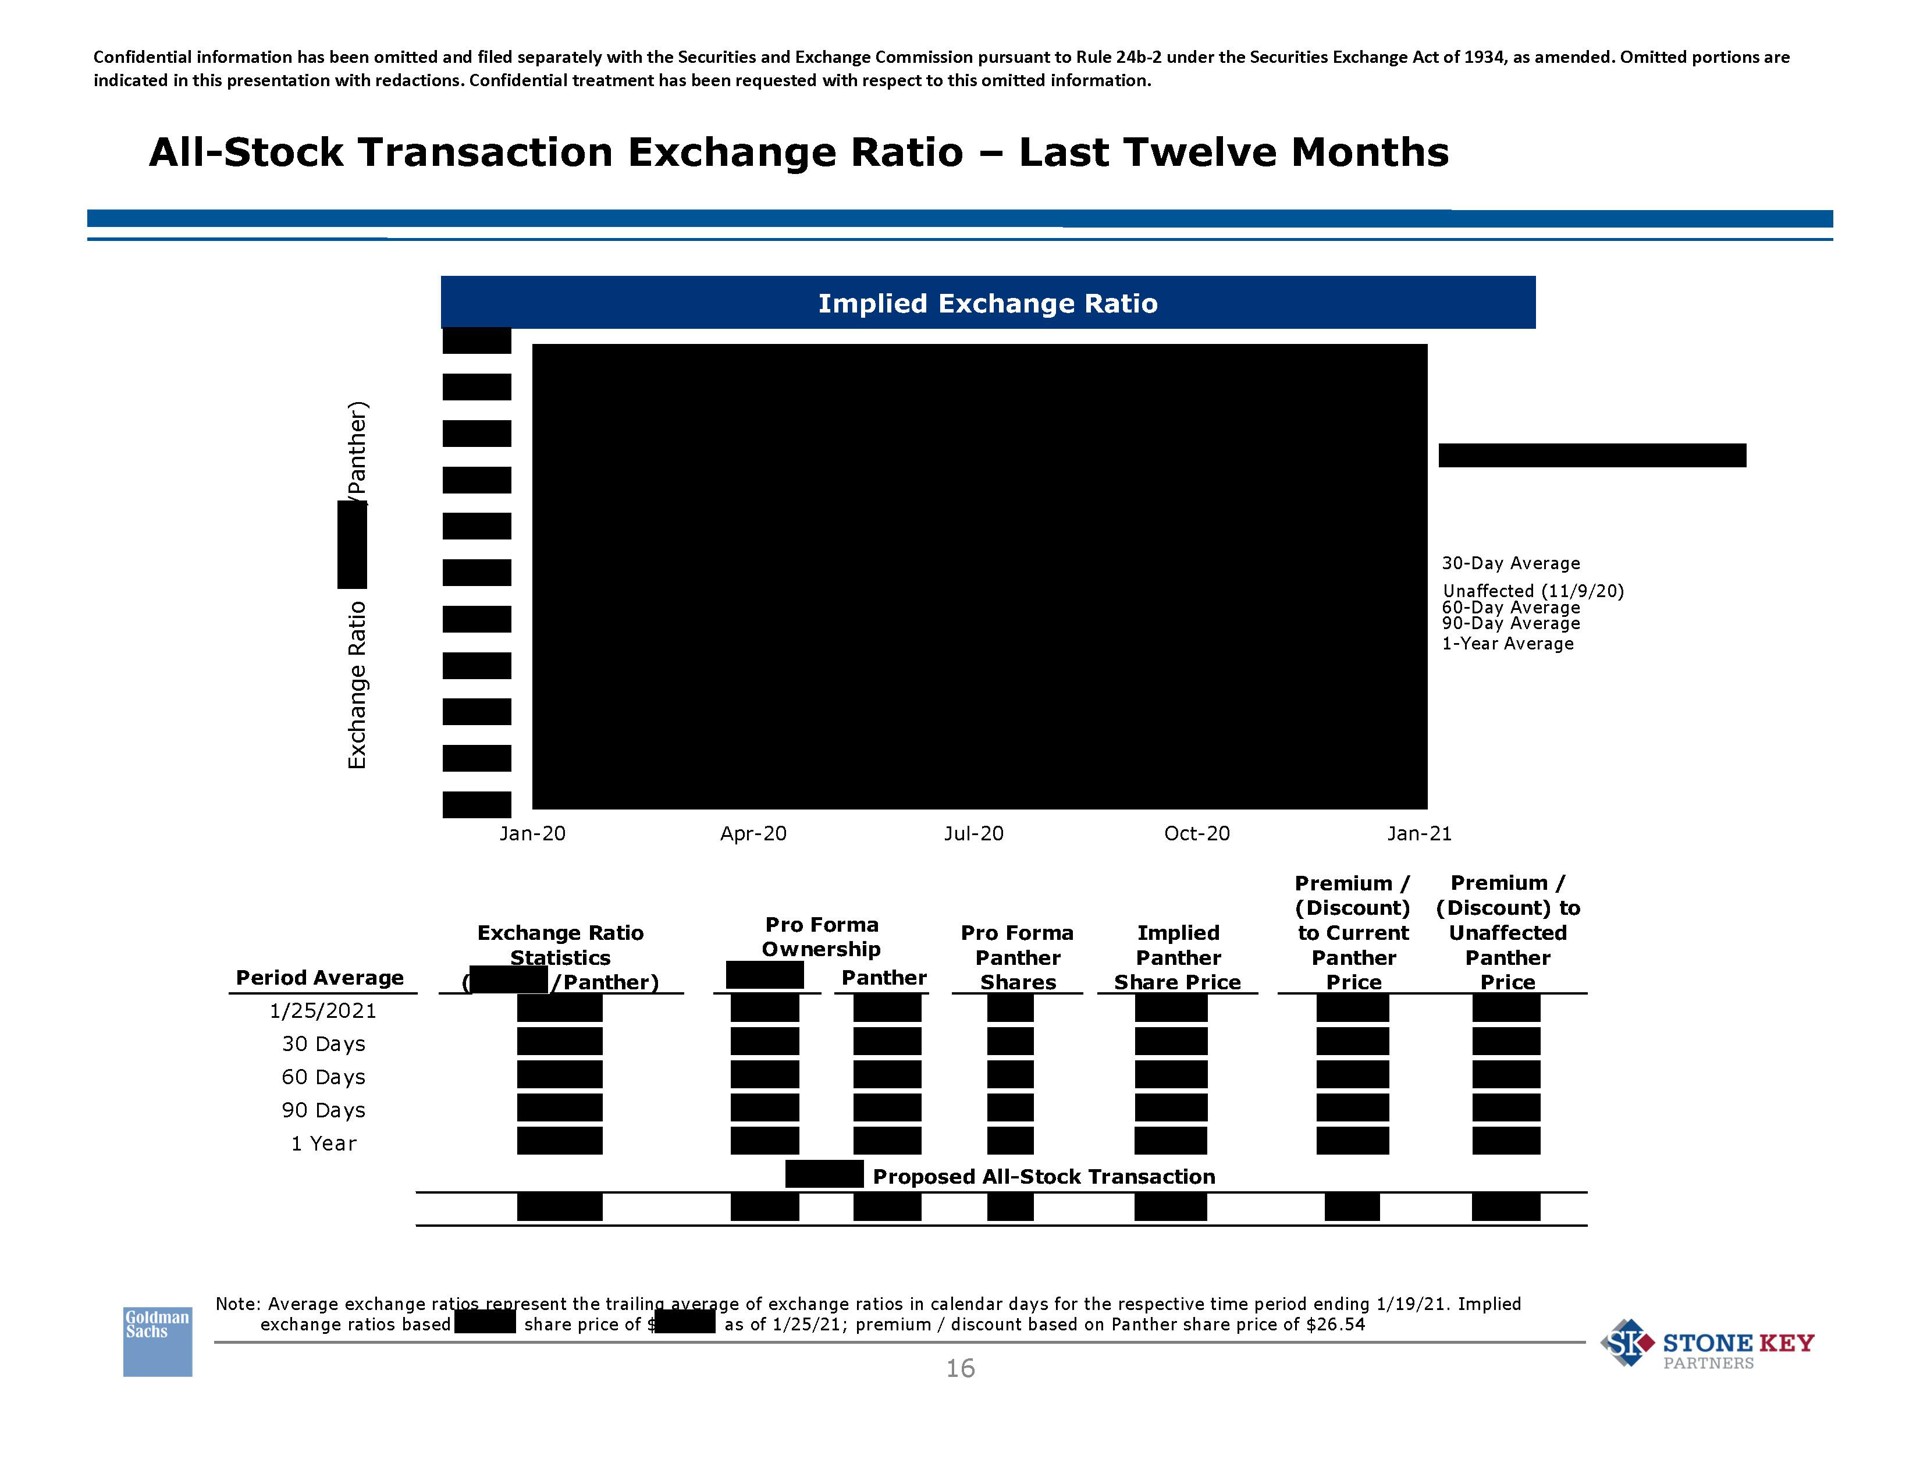 all stock transaction exchange ratio last twelve months implied exchange ratio period average a panther ownership me panther panther shares panther share price days days days year a me proposed all stock transaction panther price panther price a so stone key | Goldman Sachs